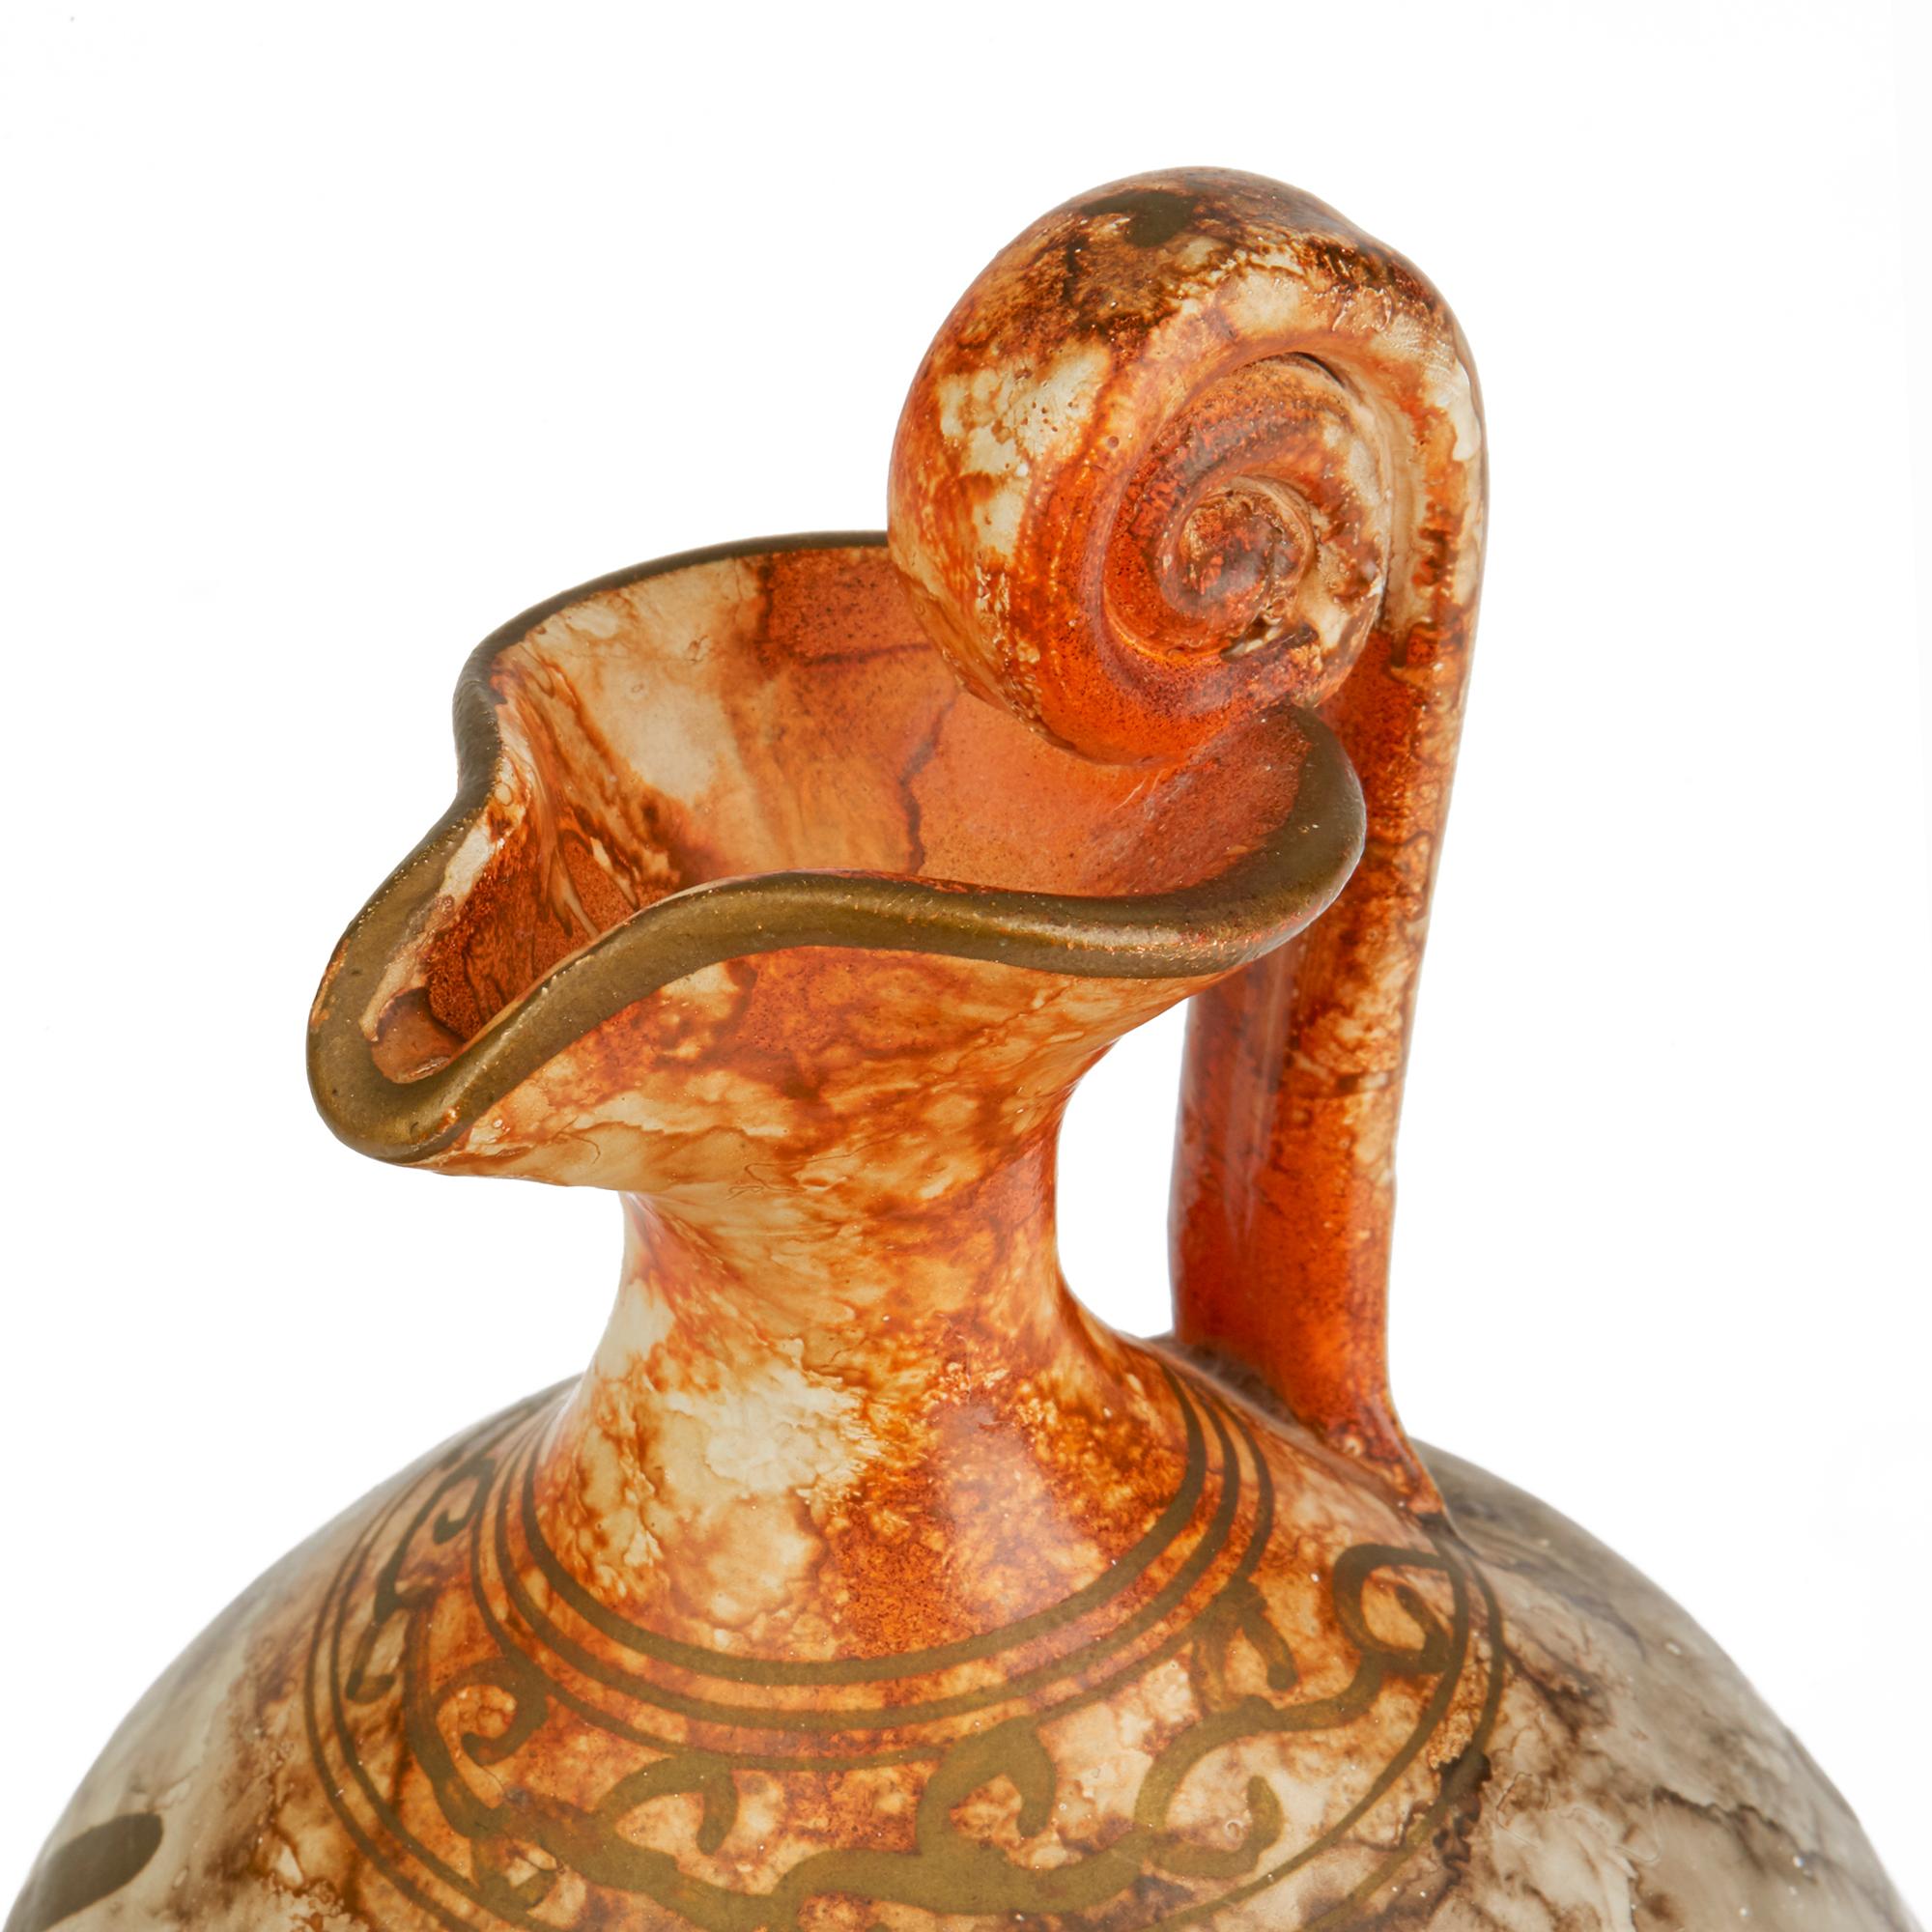 A stylish vintage Italian art pottery jug decorated with a classical figure playing a Lyre harp and attributed to Fantoni. The elegantly shaped jug stands on a narrow rounded foot with an oval shaped bulbous body short slender neck and shaped